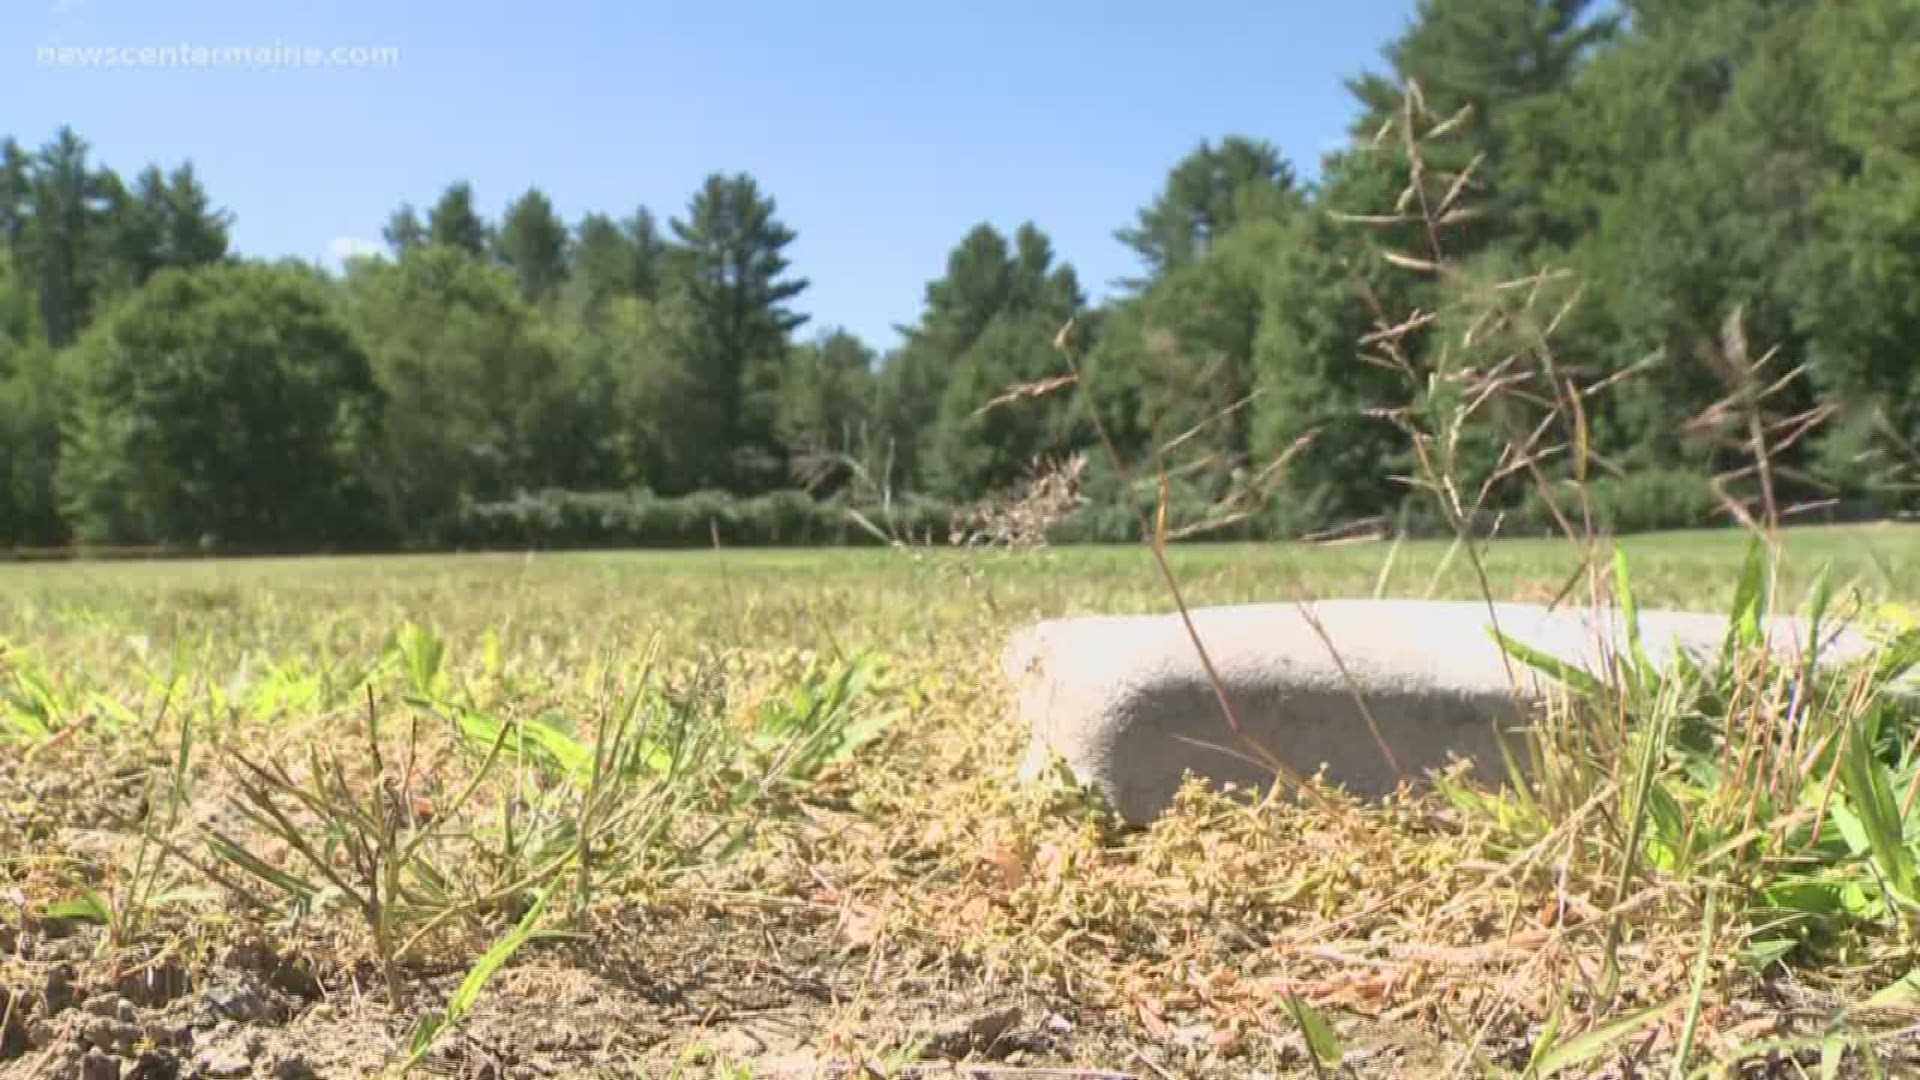 NOW: Fundraising for renovation of Spruce Mountain's sports facilities